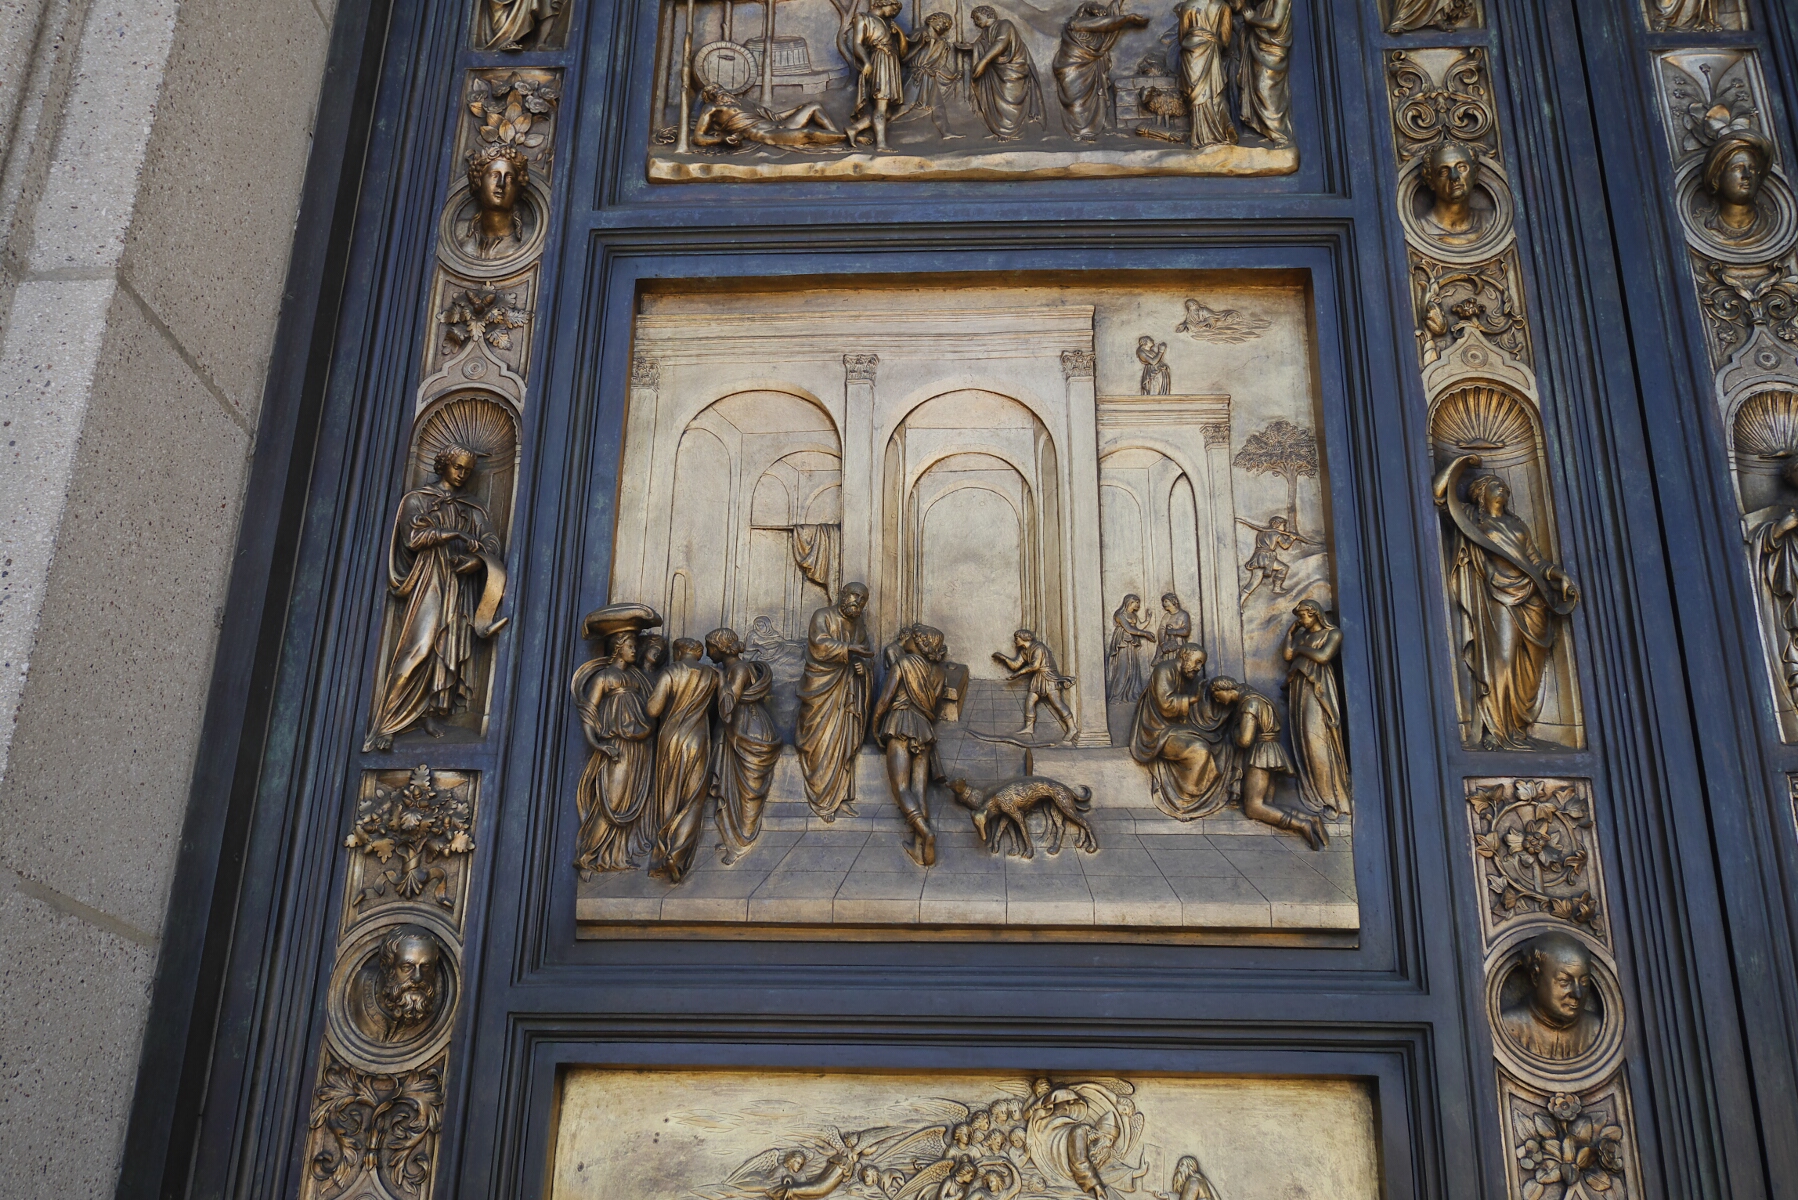 Detail of the Jacob and Esau scene from the Ghiberti doors.